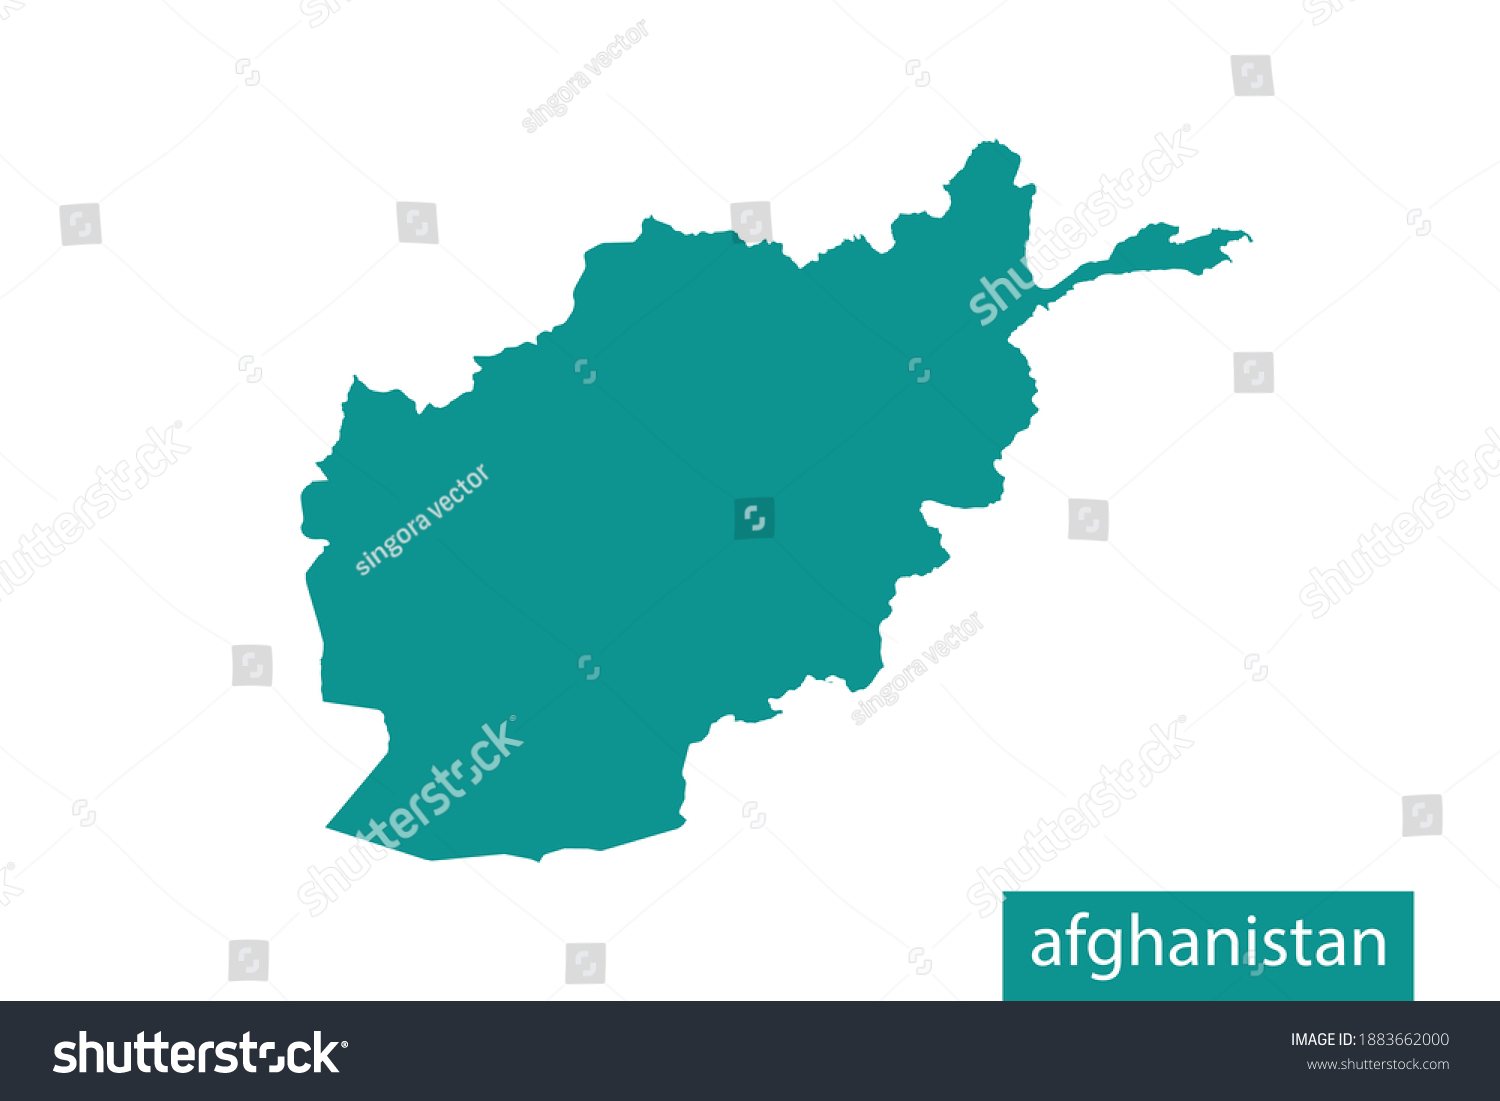 Afghanistan map green color. on white background #1883662000